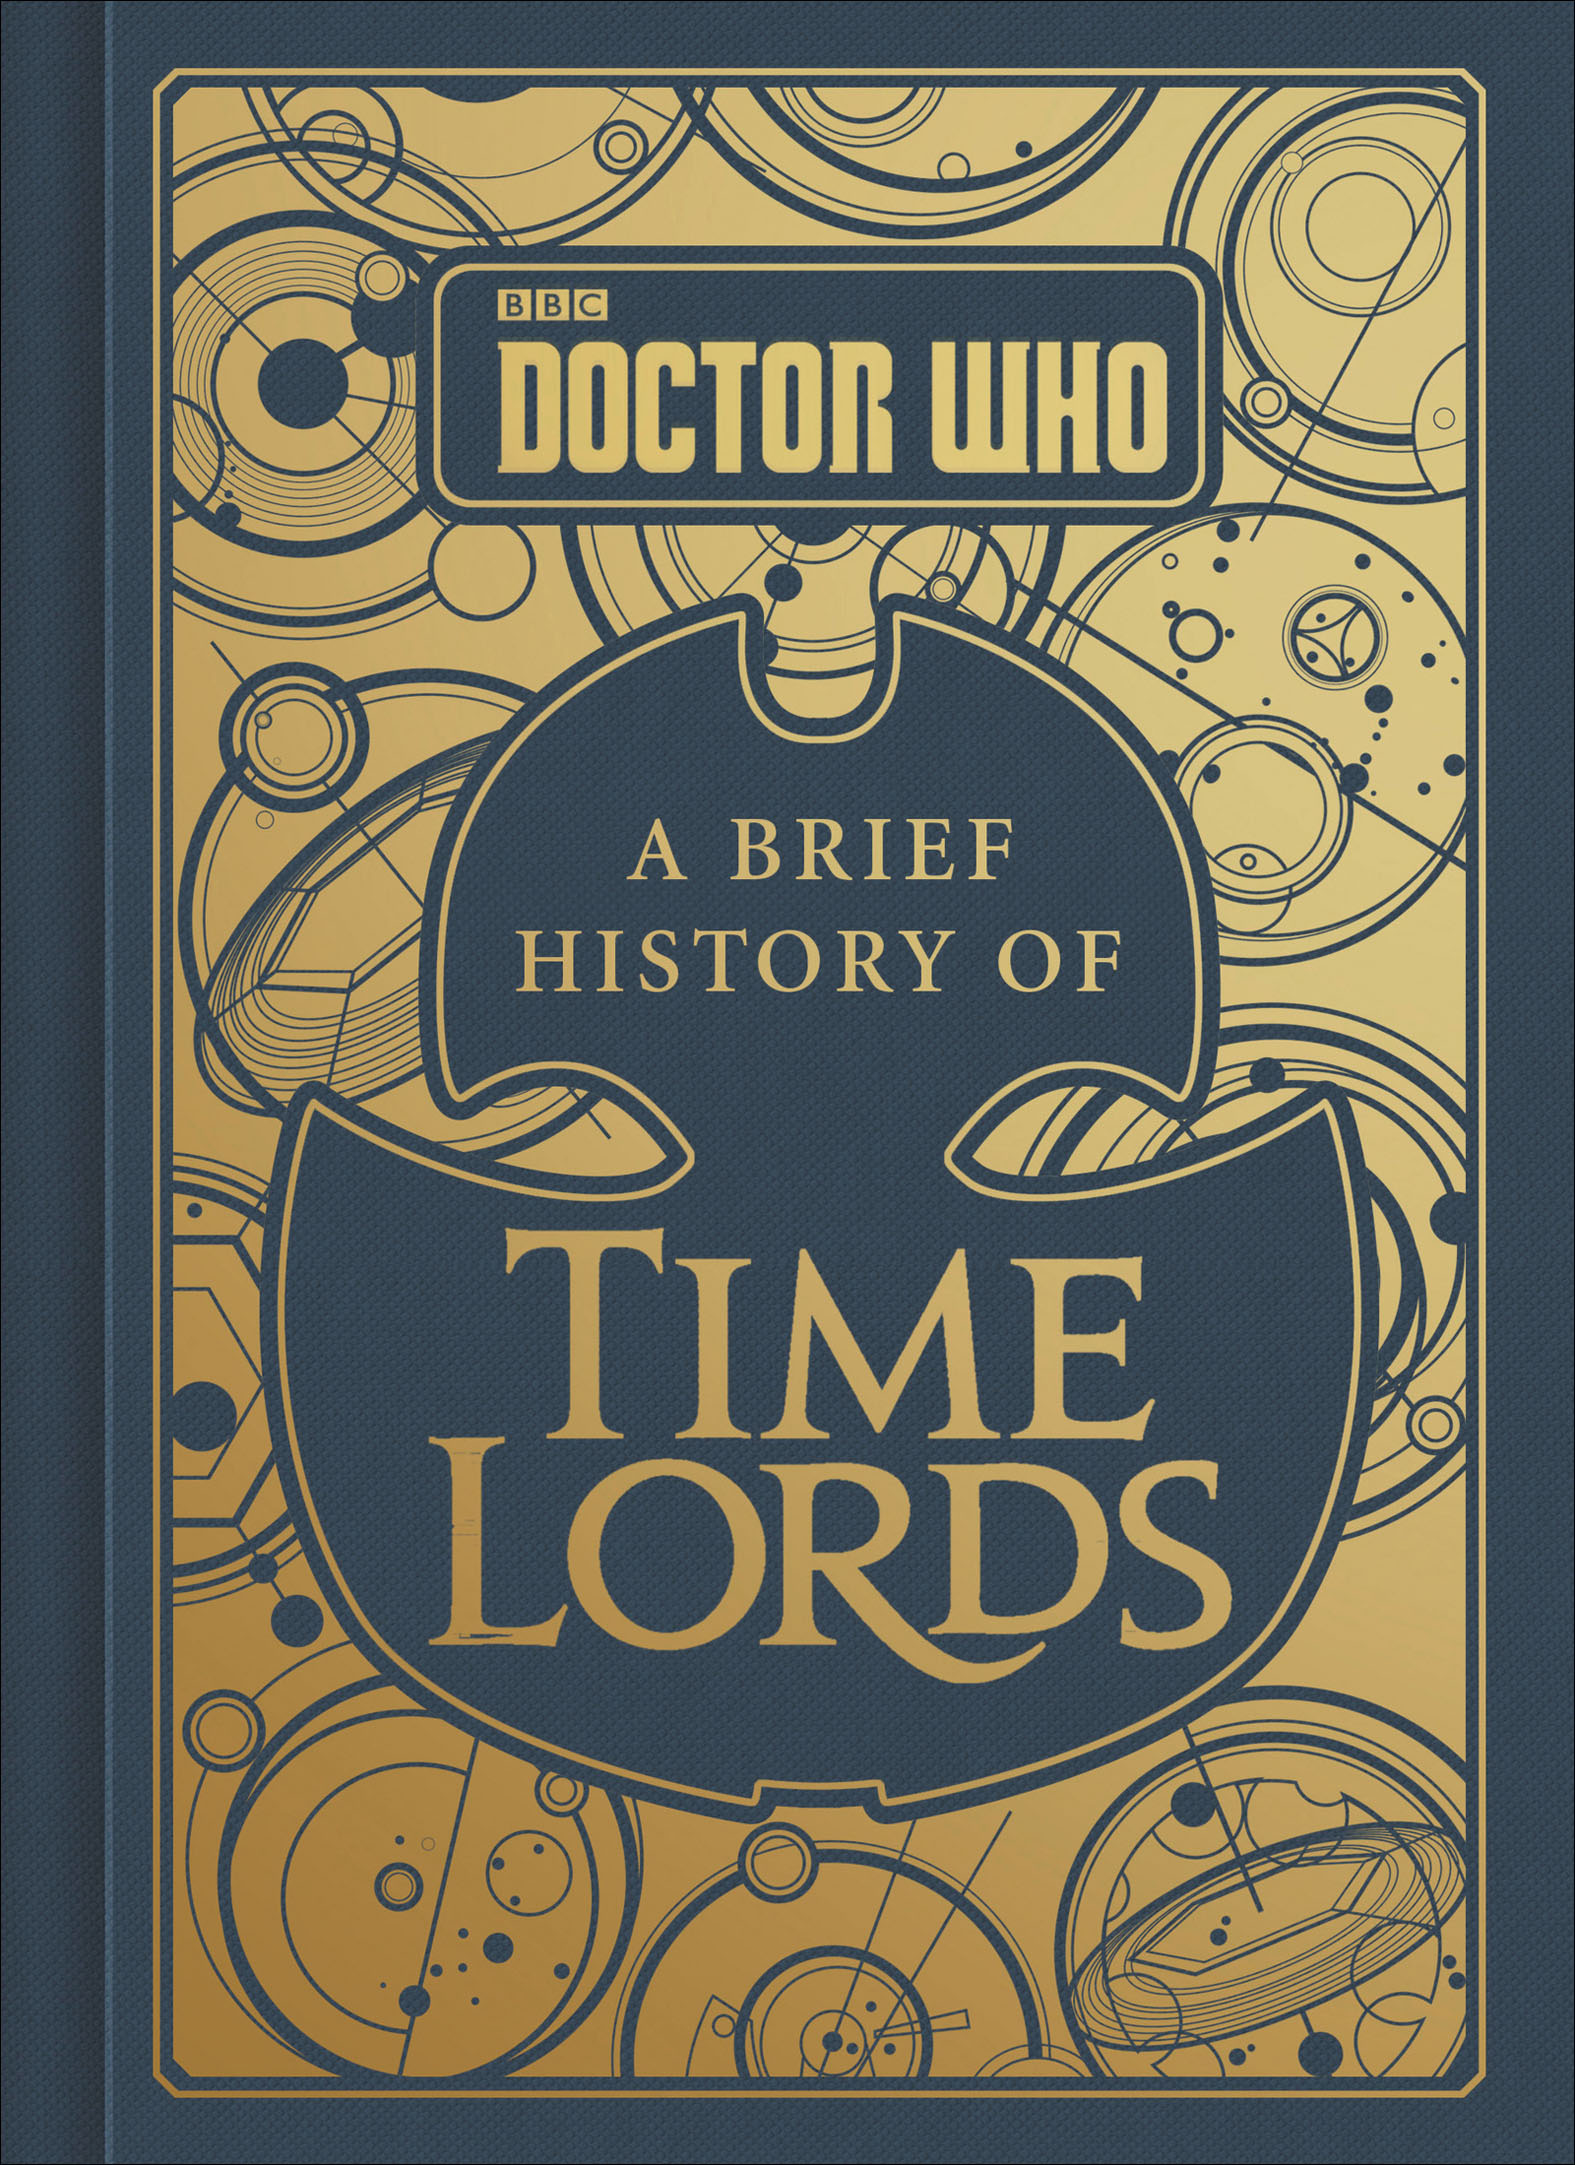 Doctor Who a brief history of Time Lords cover image